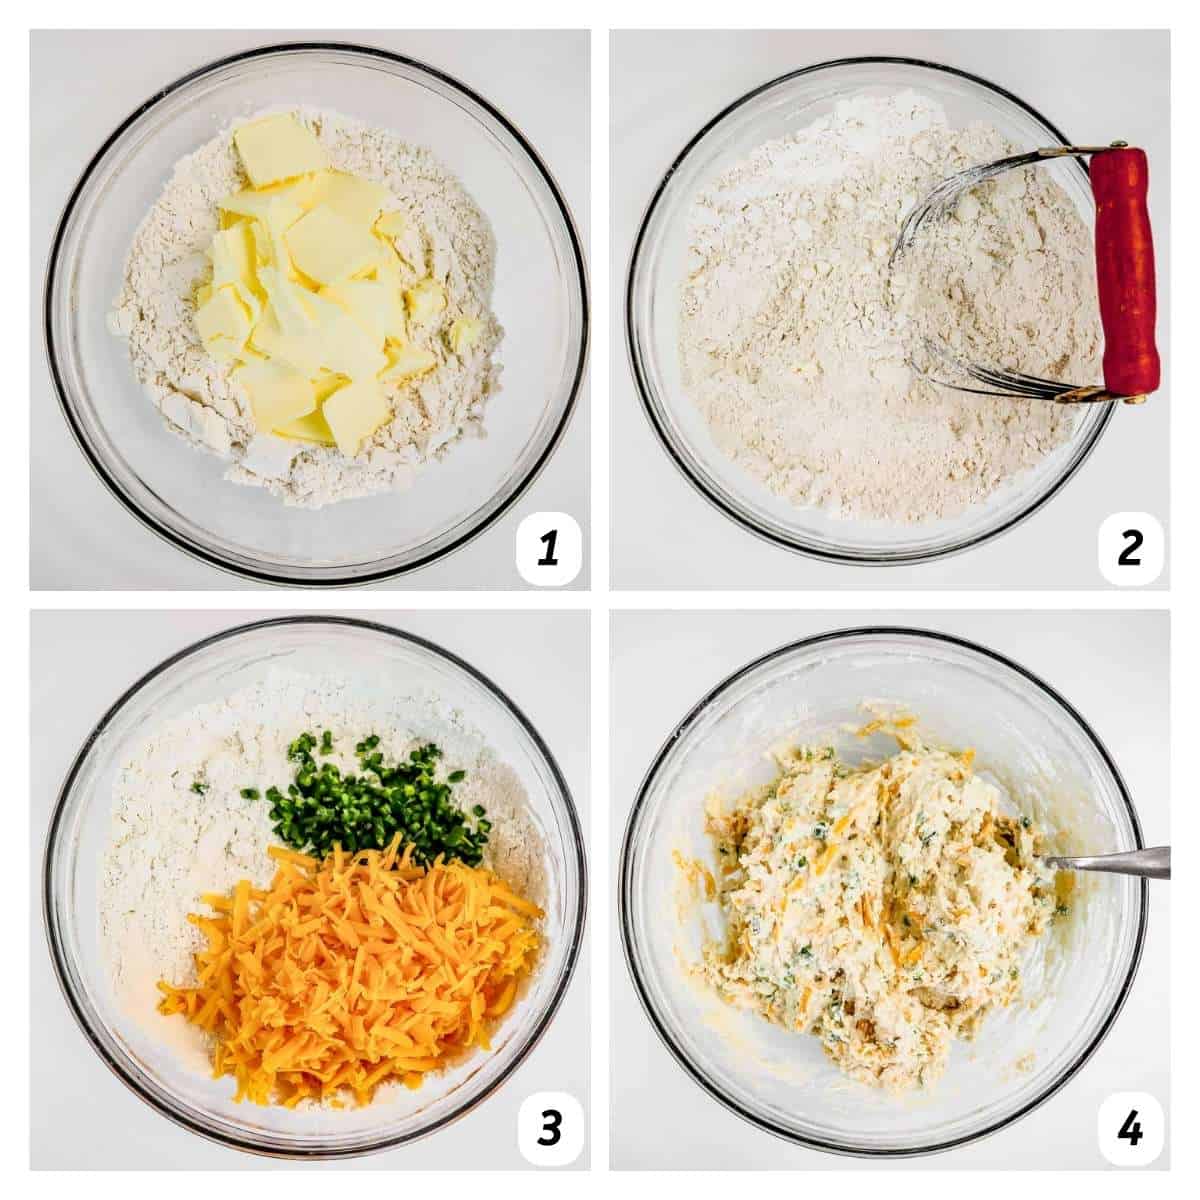 Four panel grid of process shots 1-4 - mixing together all ingredients gradually to create dough.